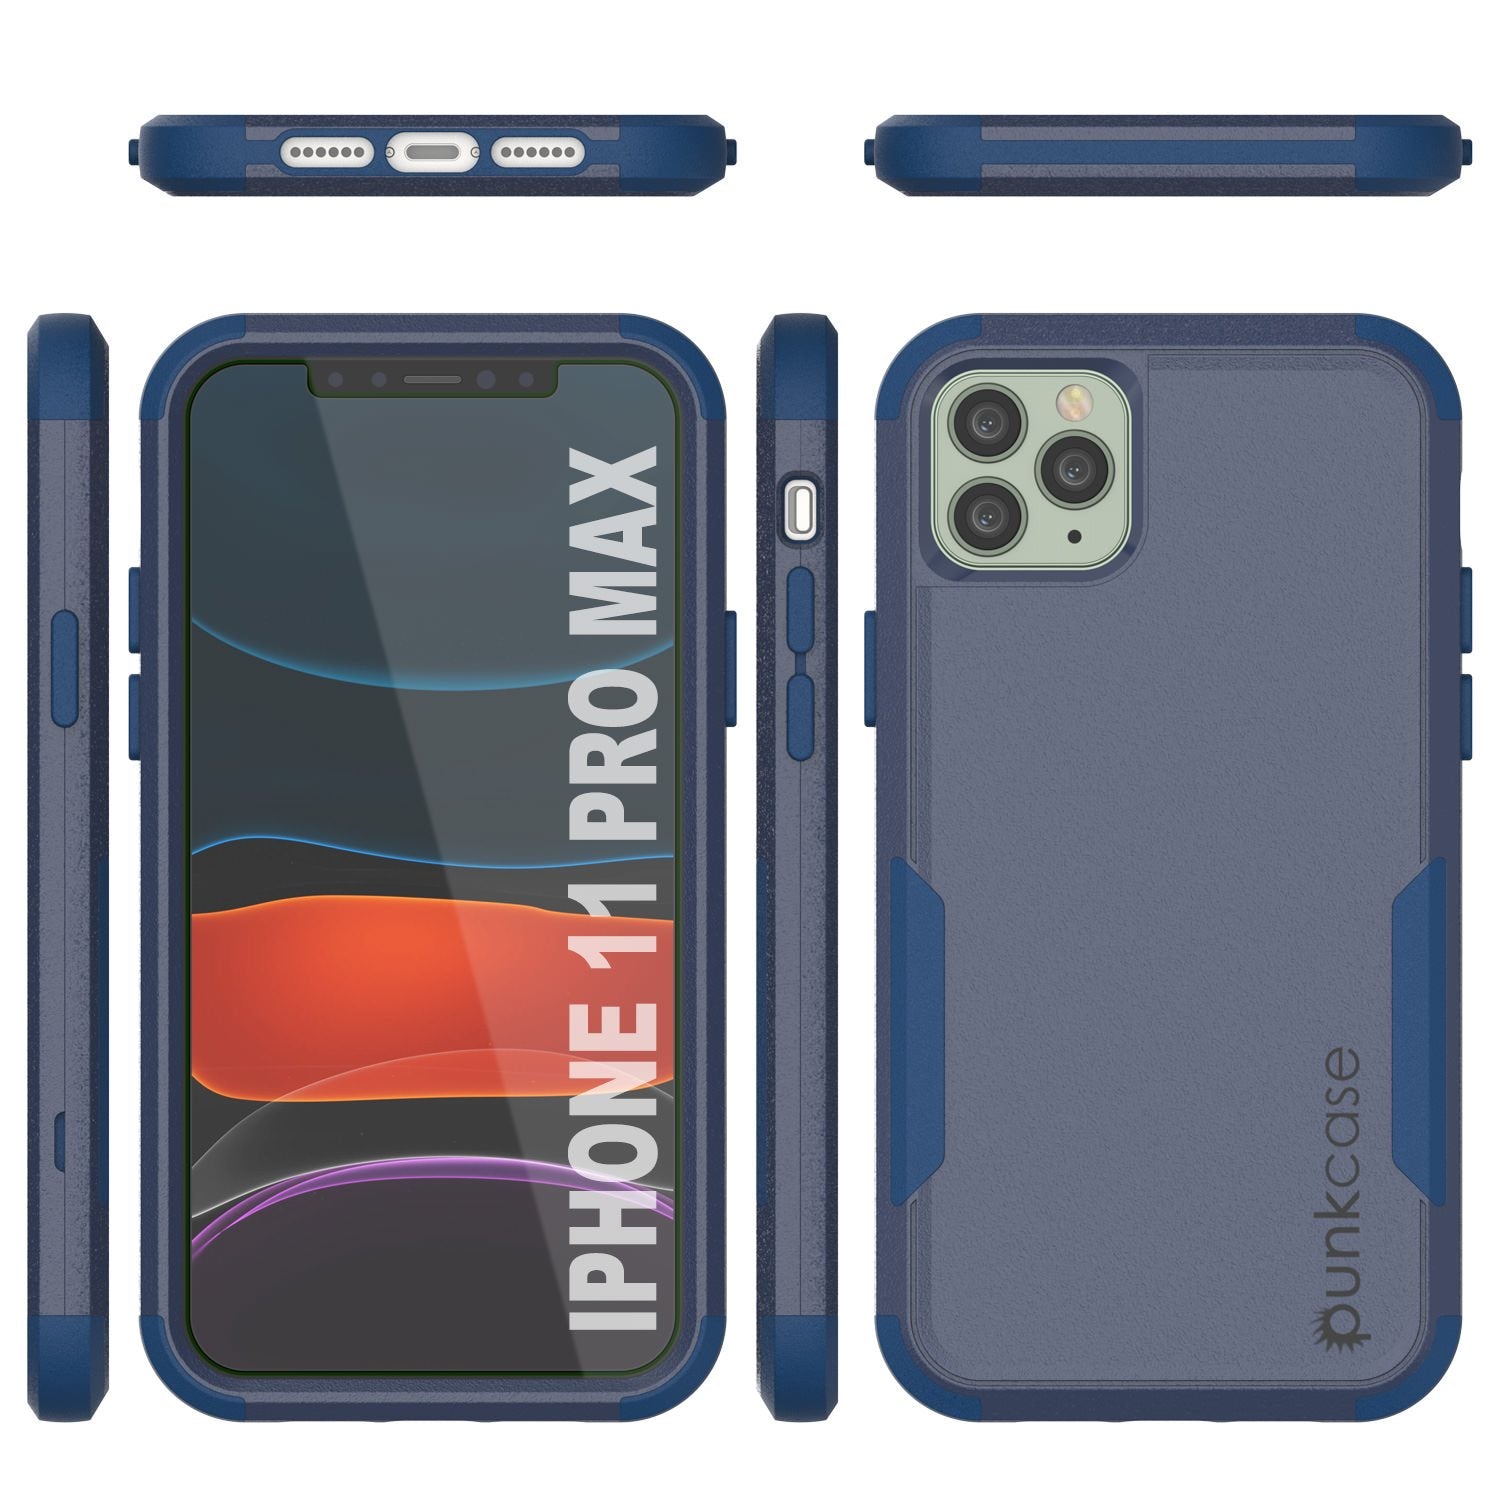 Punkcase for iPhone 11 Pro Max Belt Clip Multilayer Holster Case [Patron Series] [Navy]